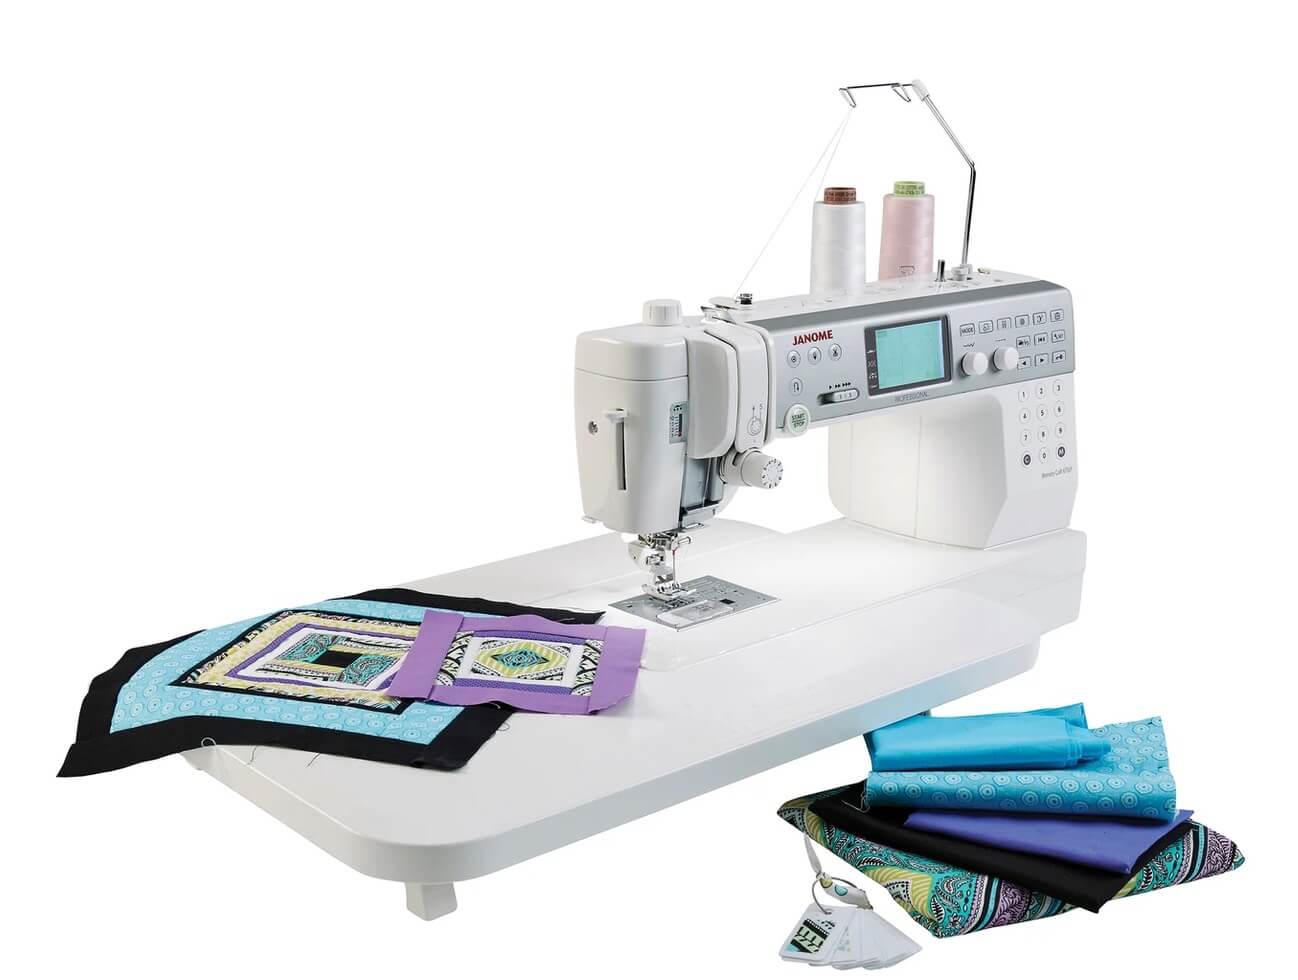 Janome Memory Craft 6700P sewing machine with extension table, showcasing the expansive work area and built-in thread stand, with vibrant quilting fabric ready for stitching.